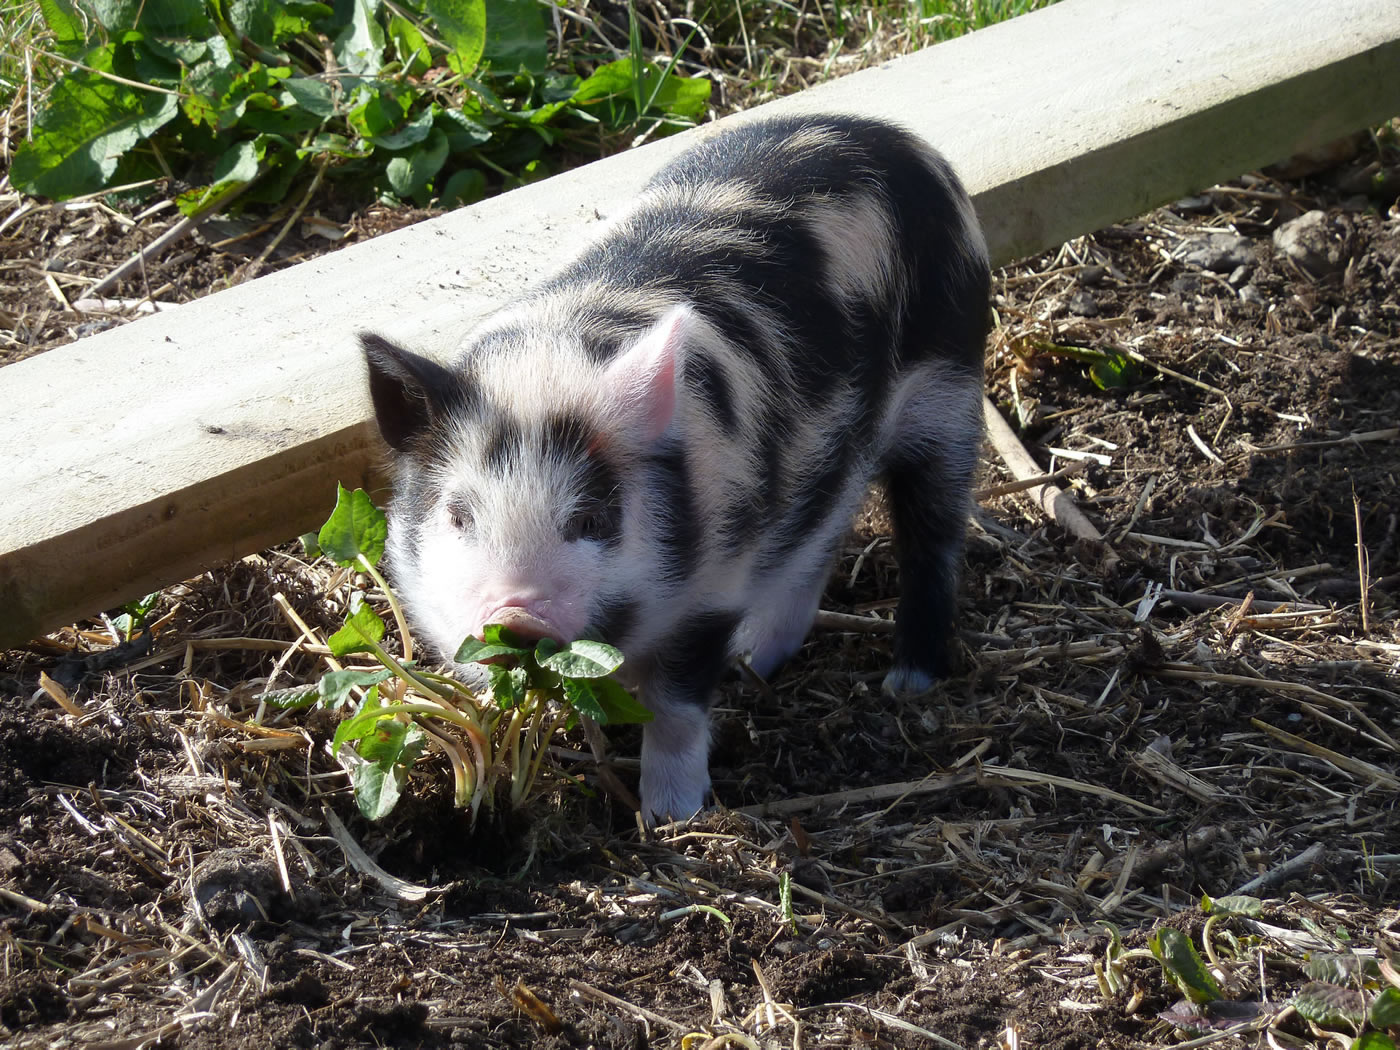 Picture of our pet pig smelling plants to see if they smell edible.